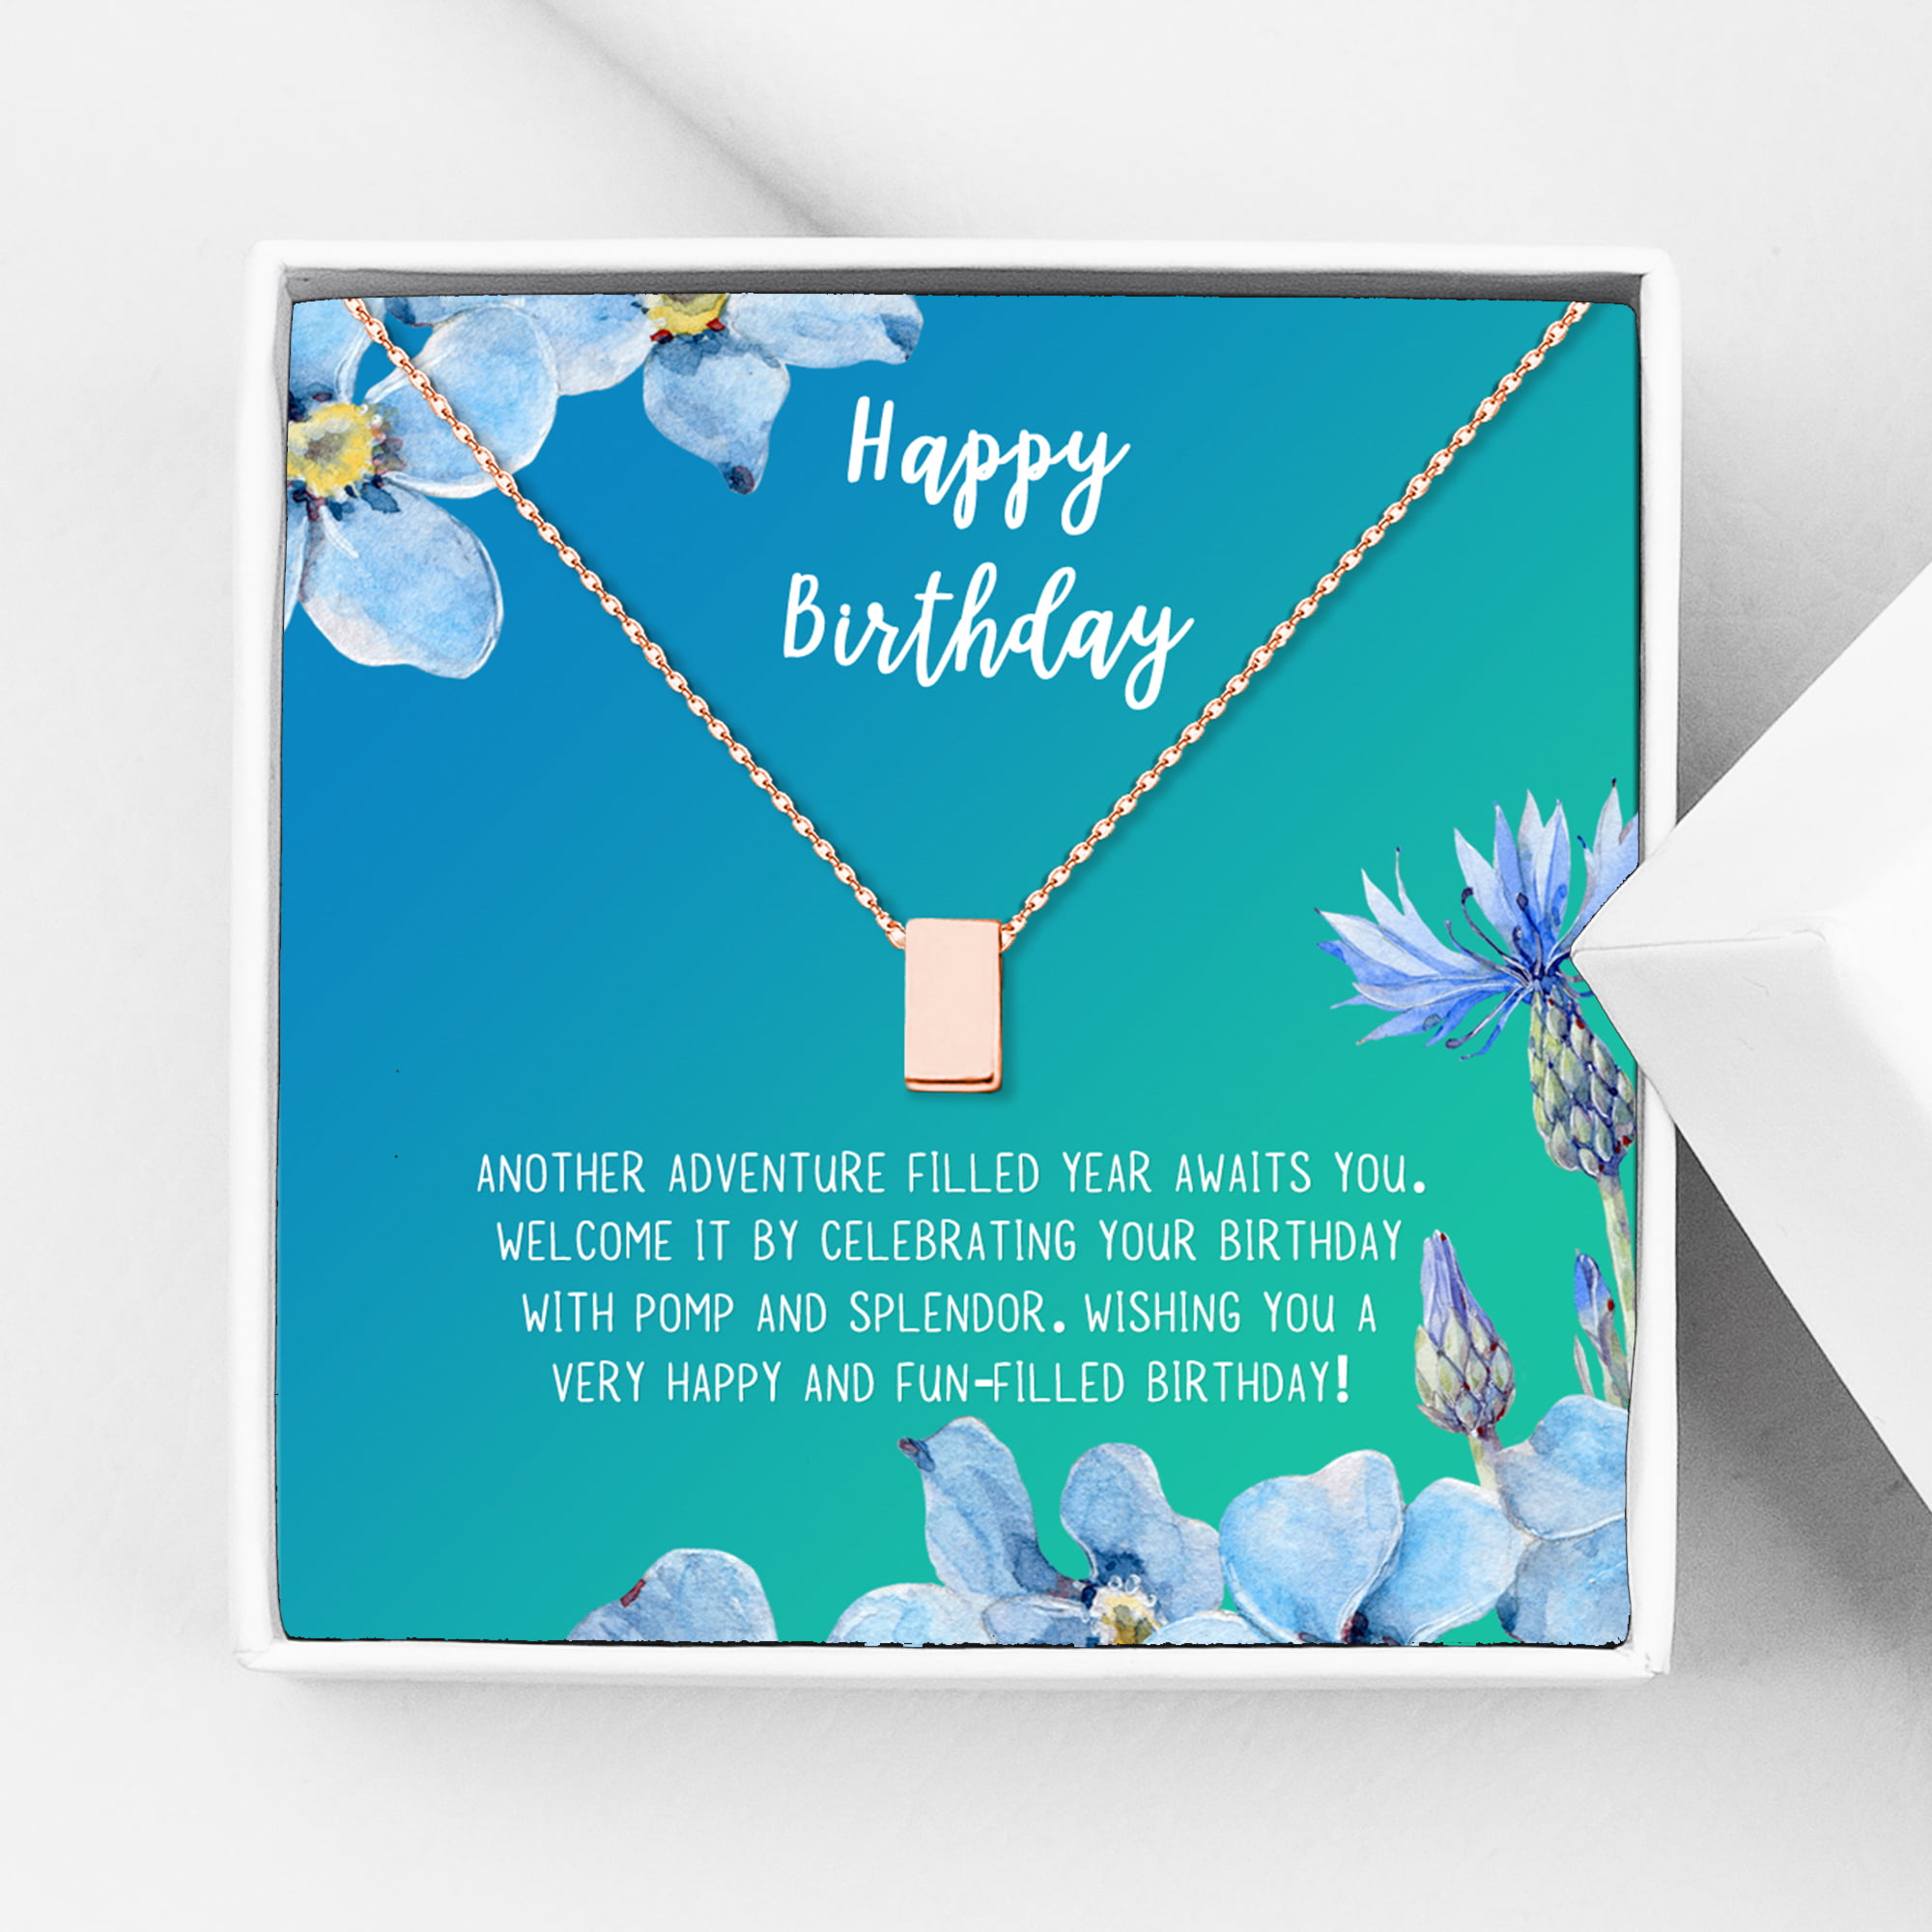 Details about   Wife Husband Personalised Anniversary Gifts Him Her Girlfriend Boyfriend Card 